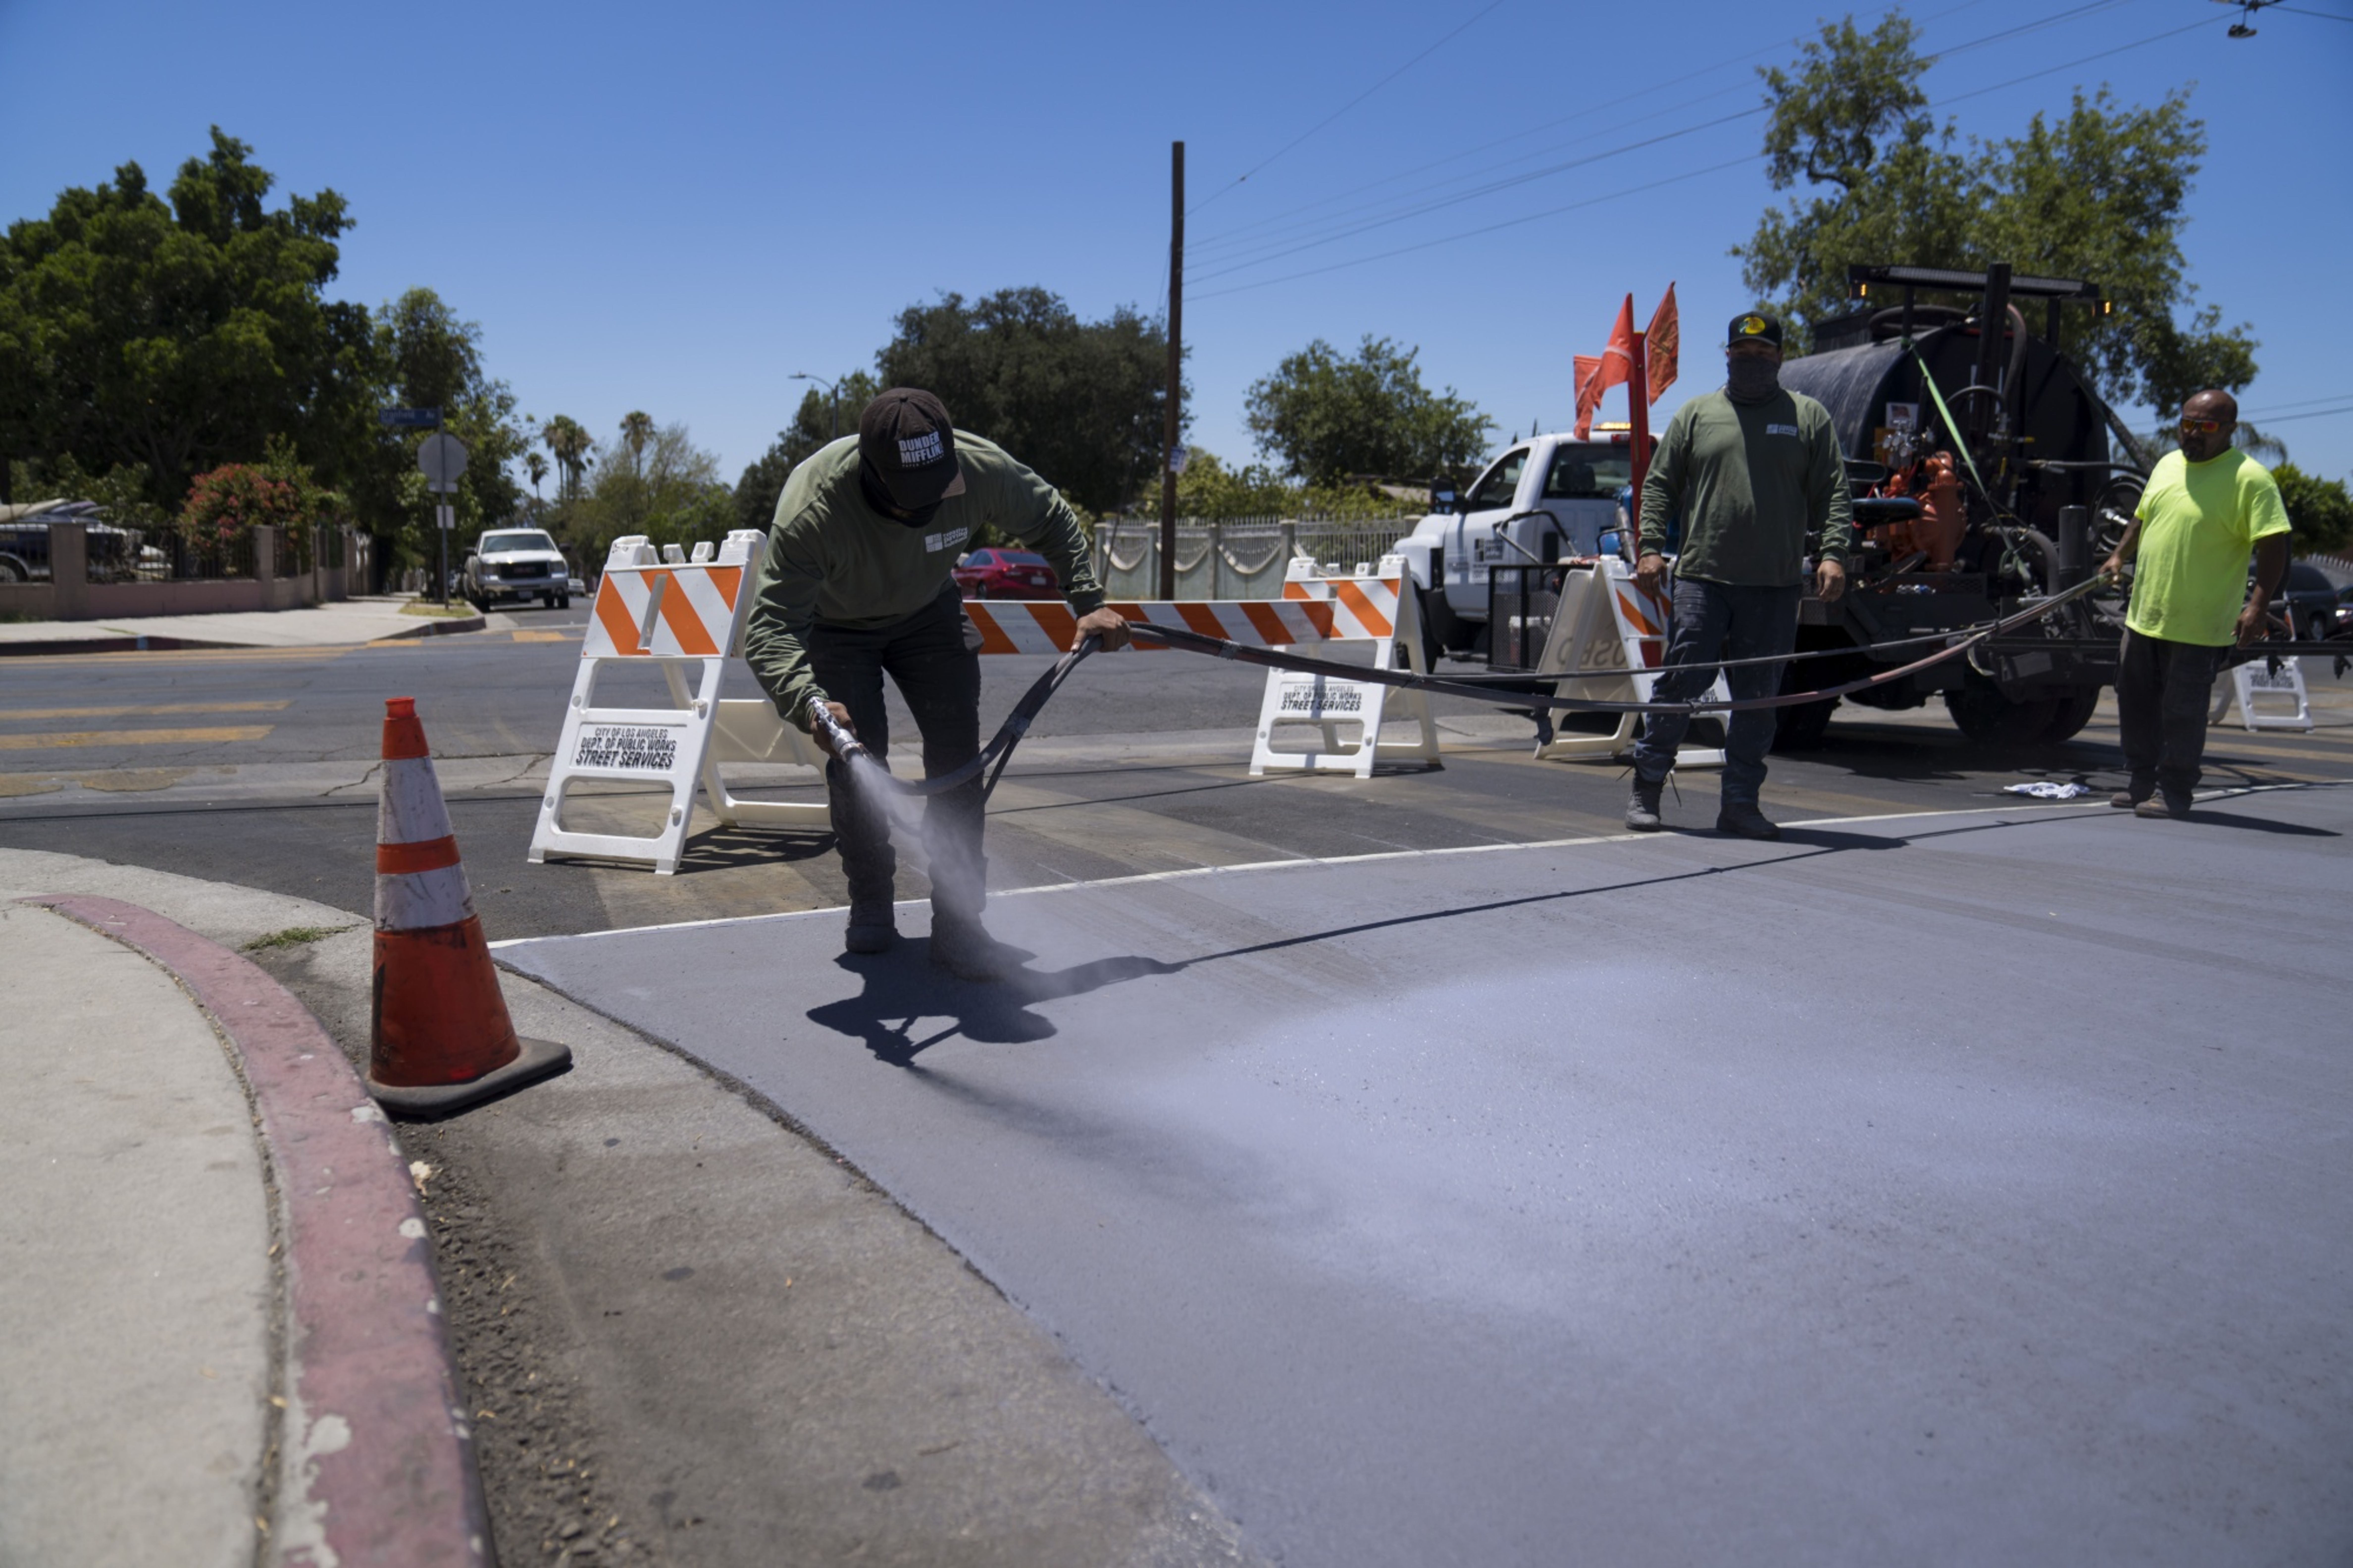 A worker applies a reflective pavement coating to a street in Pacoima, California, US, on Tuesday, July 19, 2022. Reflective coating for parks and pavement can reduce temperatures in lower-income areas with limited shade as climate-driven heat waves become more frequent and intense in Southern California.